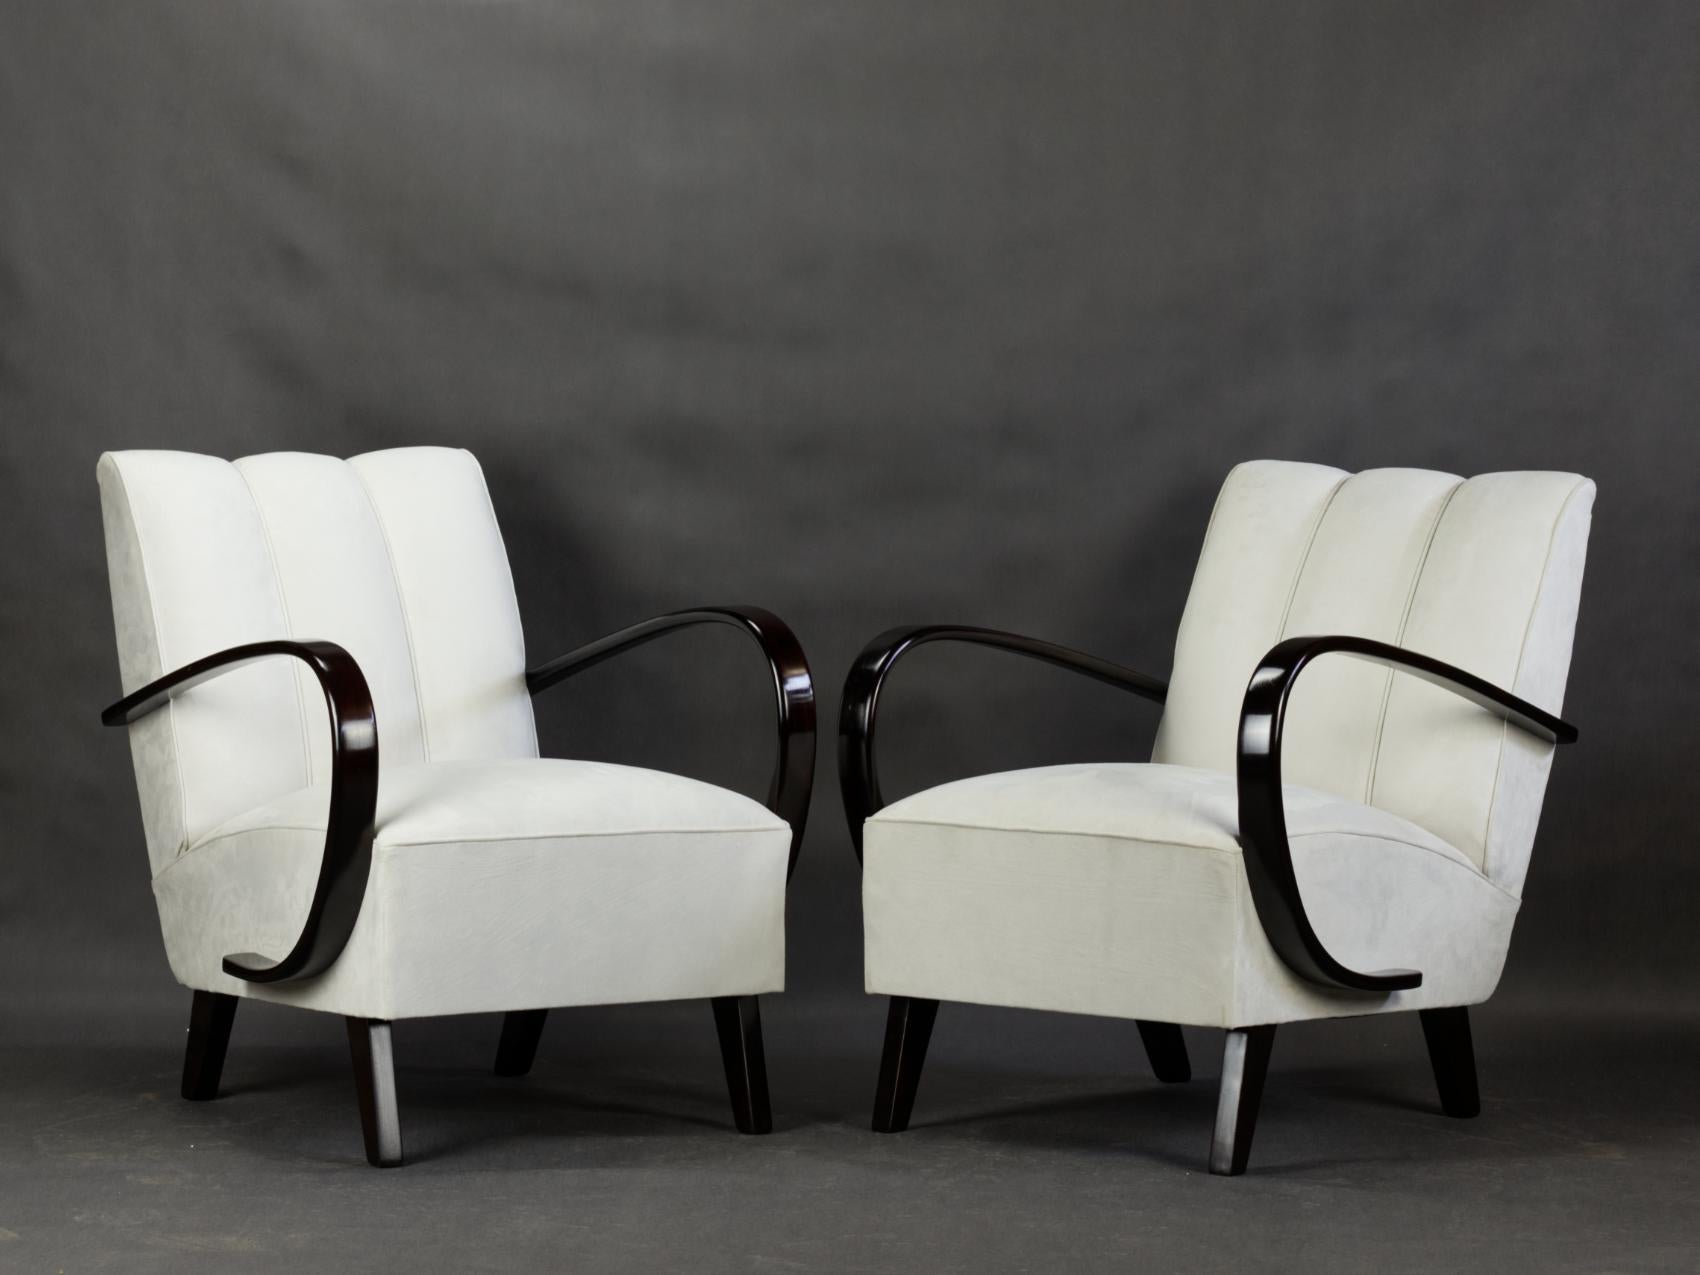 Pair of Armchairs by Jindrich Halabala, 1950s For Sale 2